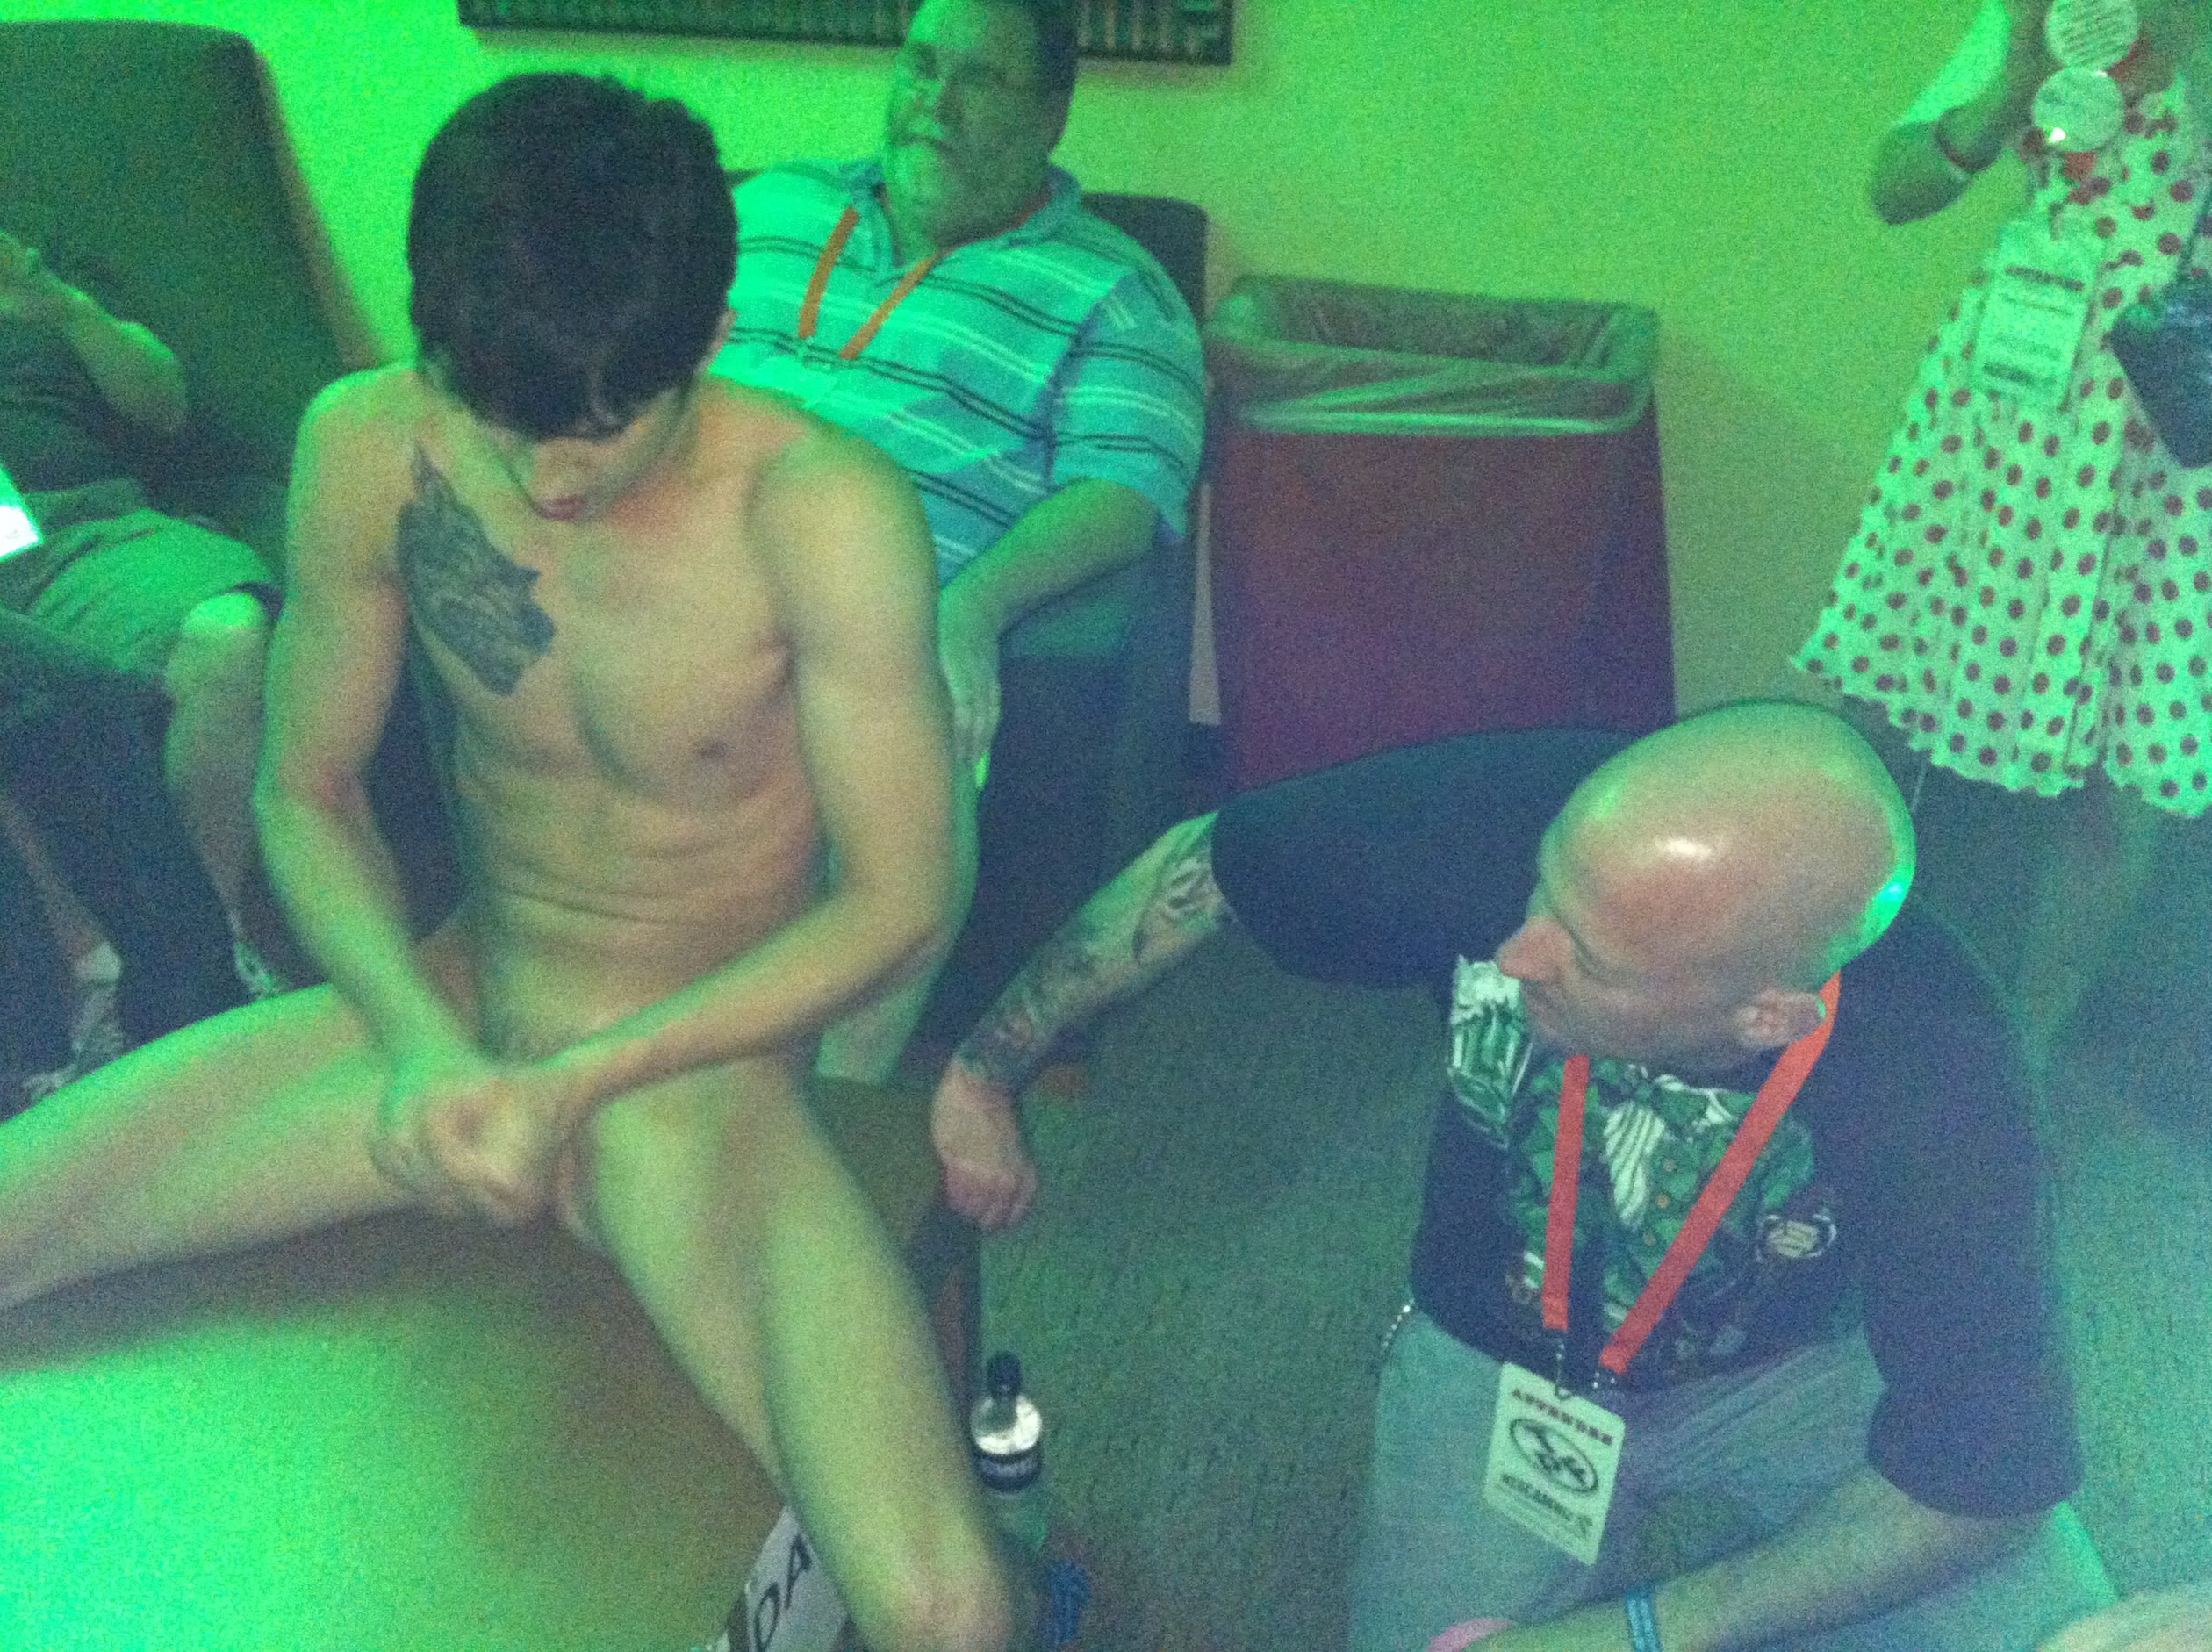 Night 1 Of Phoenix Forum 2013 I Watched A Man Ejaculate Onto A Coffee Table